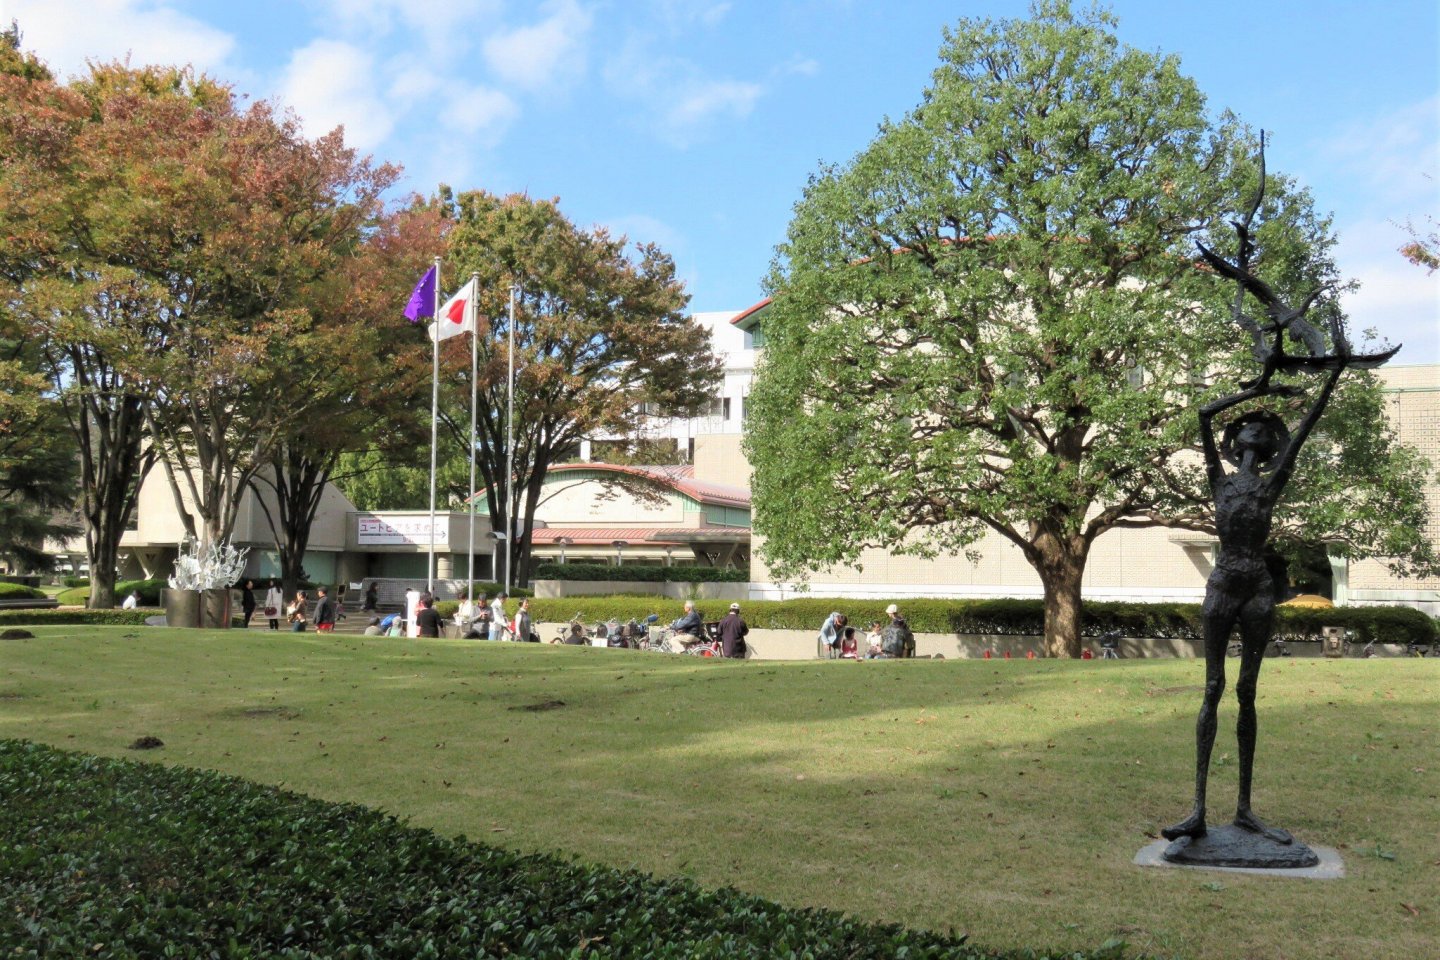 The spacious grounds of the museum